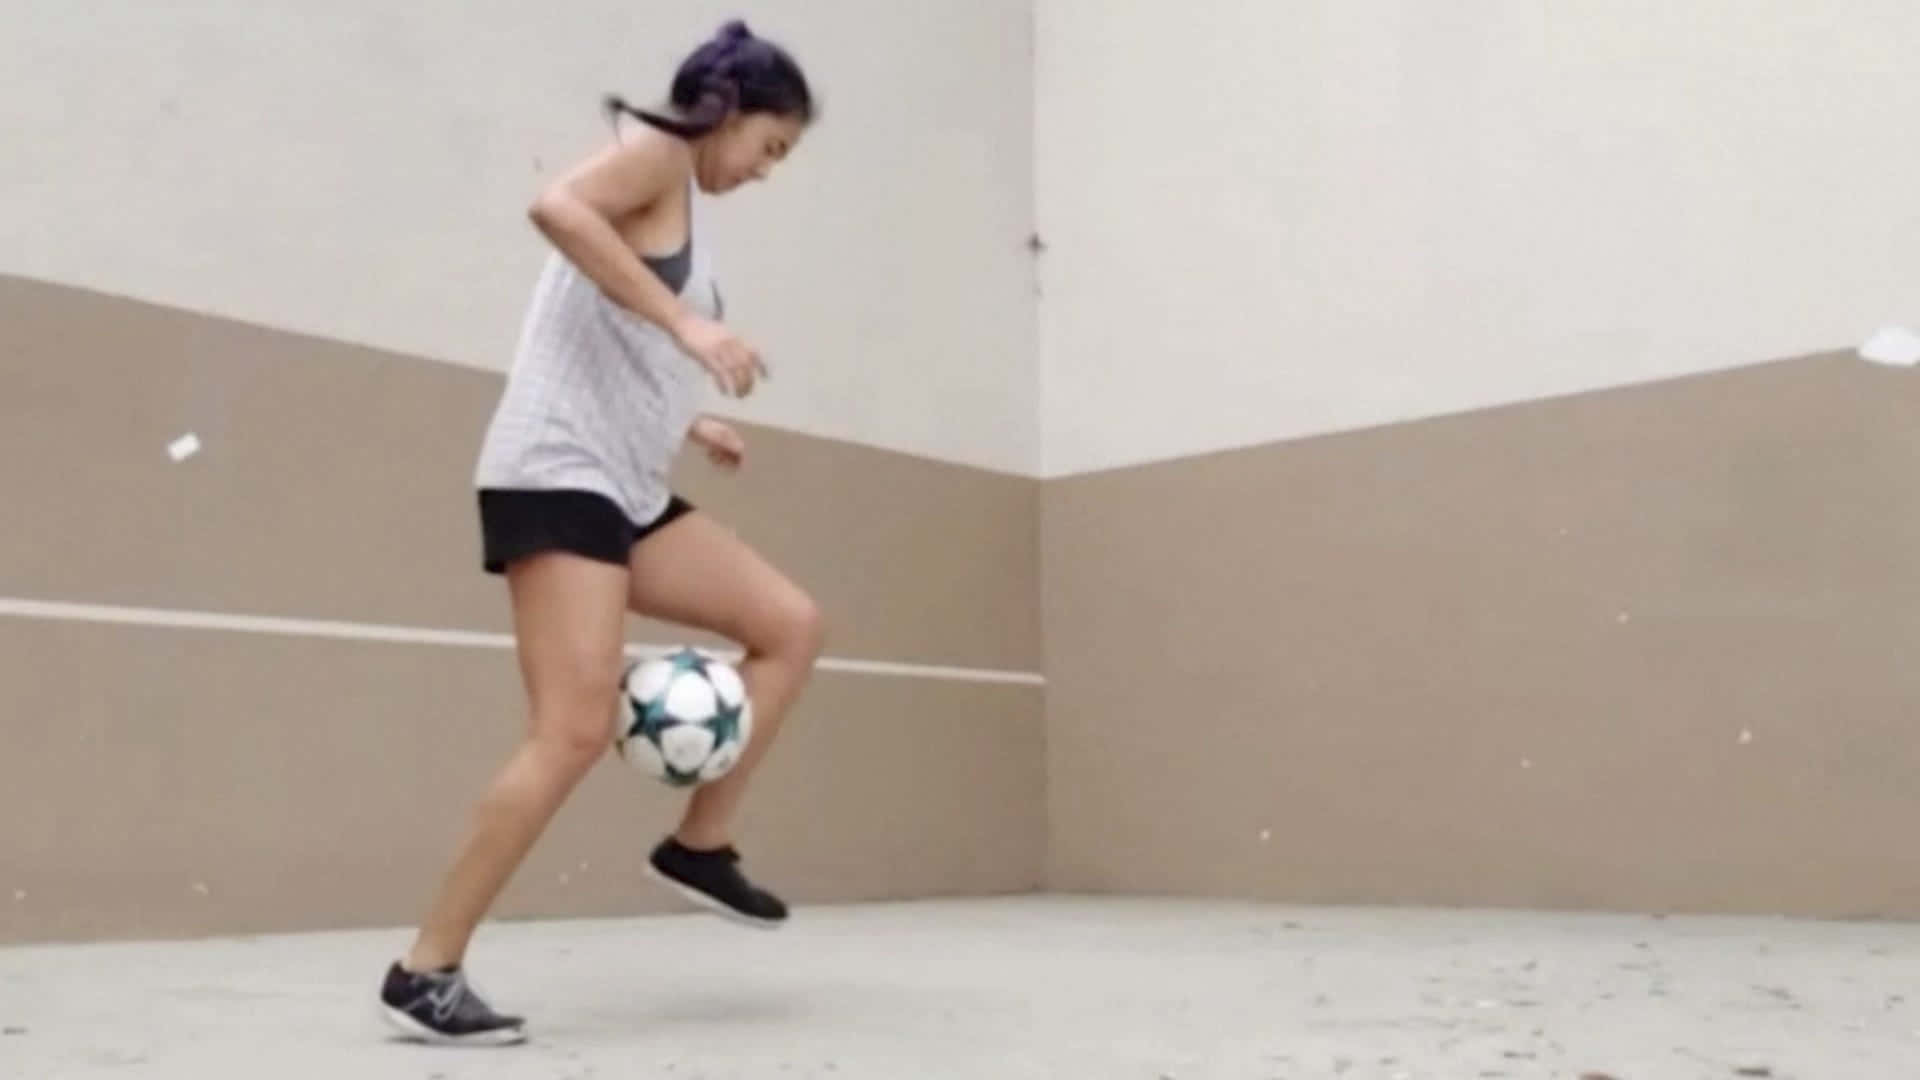 Freestyle Soccer Trick Performance Wallpaper